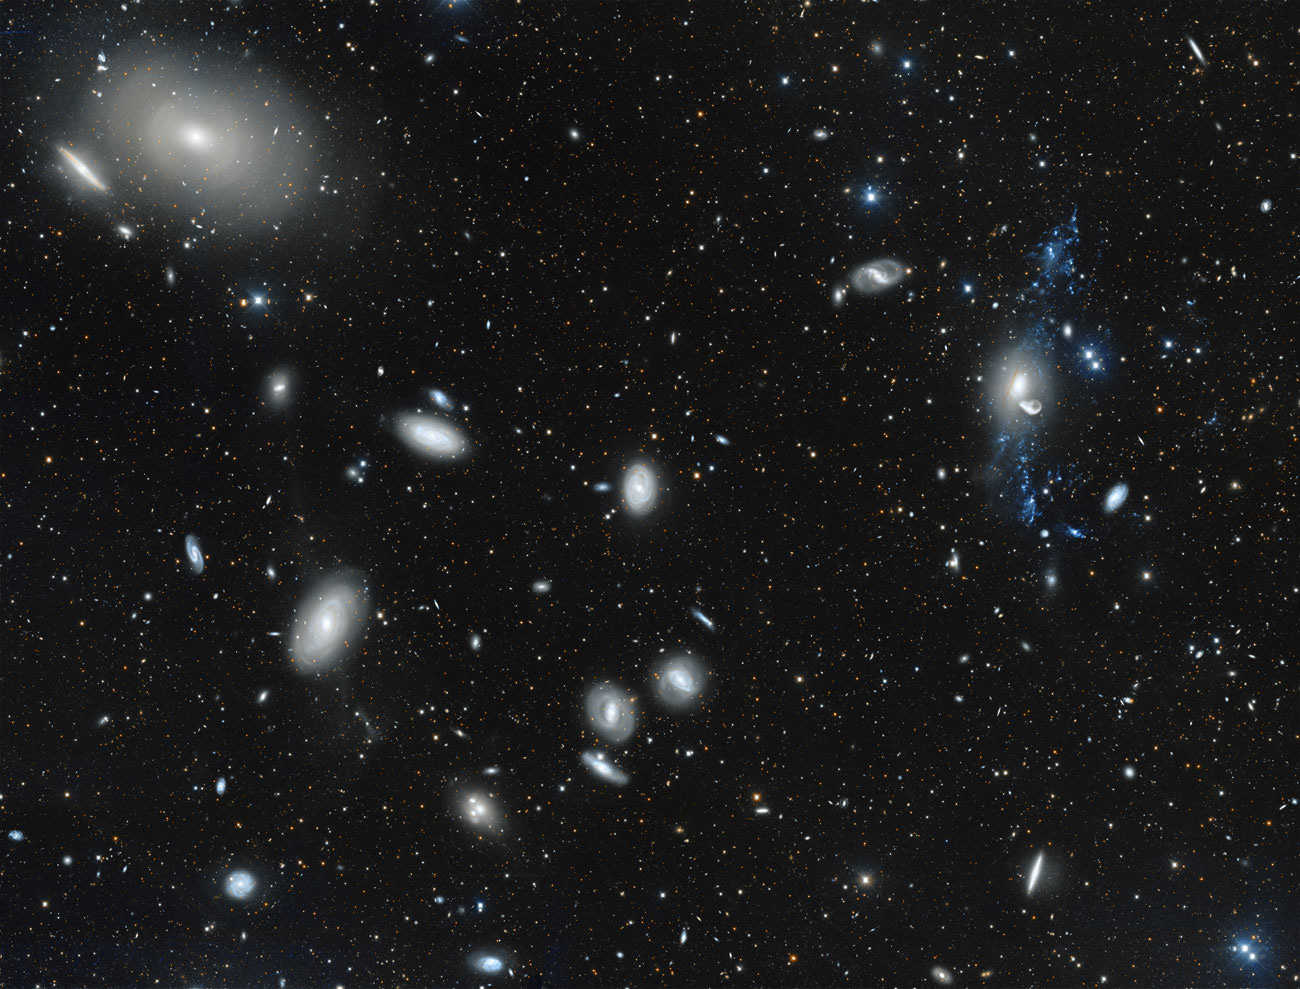 An image showing dozens of galaxies, mostly spirals and ellipticals, looking ghostly pale and white. Thousands of stars dot the photo as well.